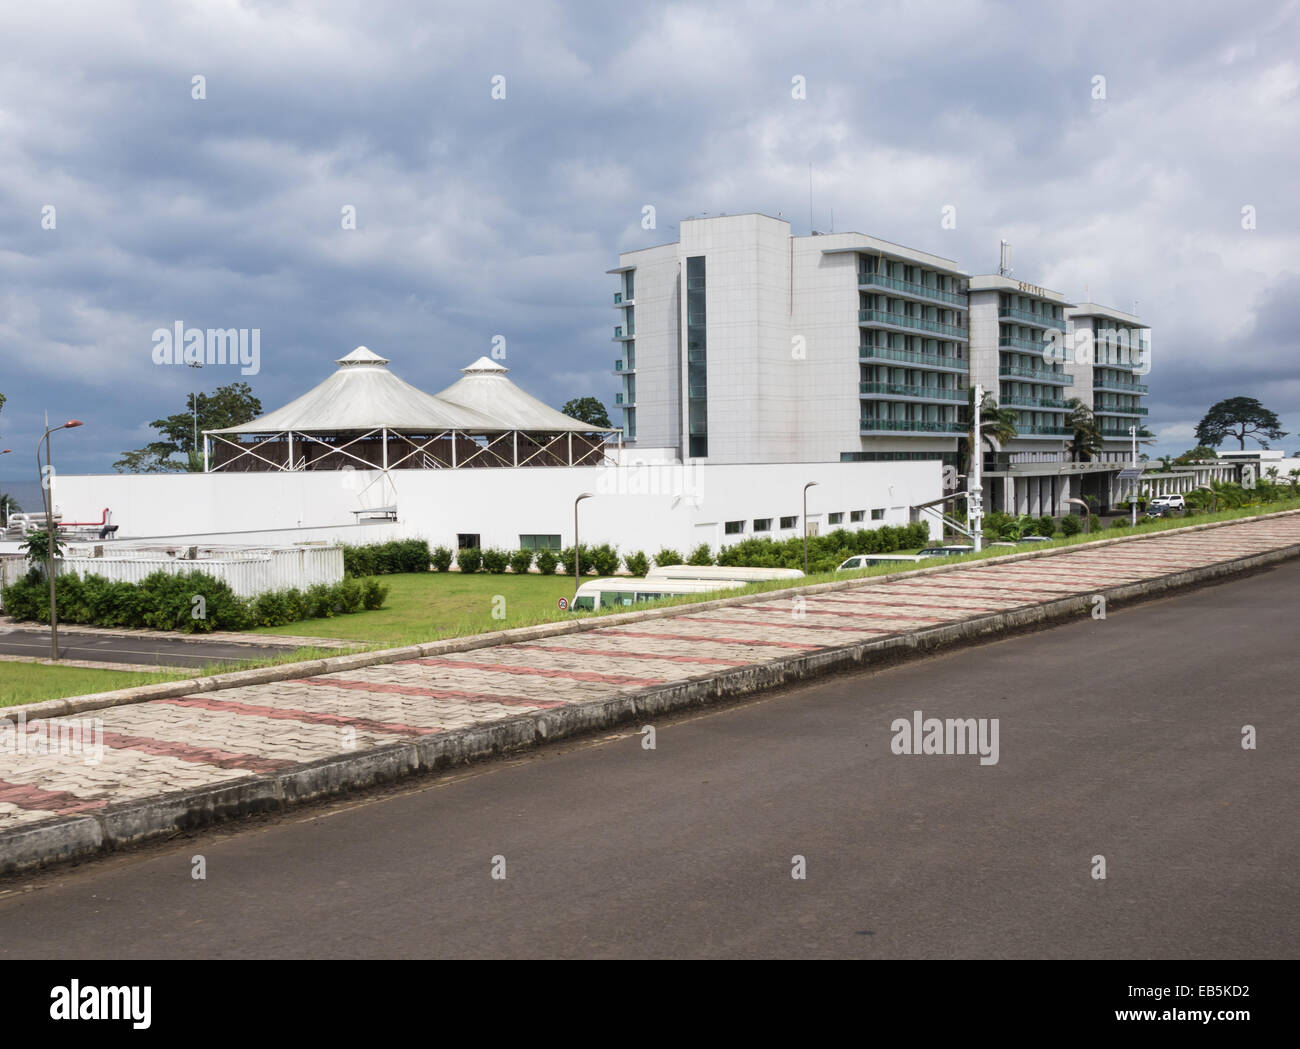 Sofitel Hotel building and facade in Sipopo near the capital city of Malabo, Equatorial Guinea, Africa Stock Photo